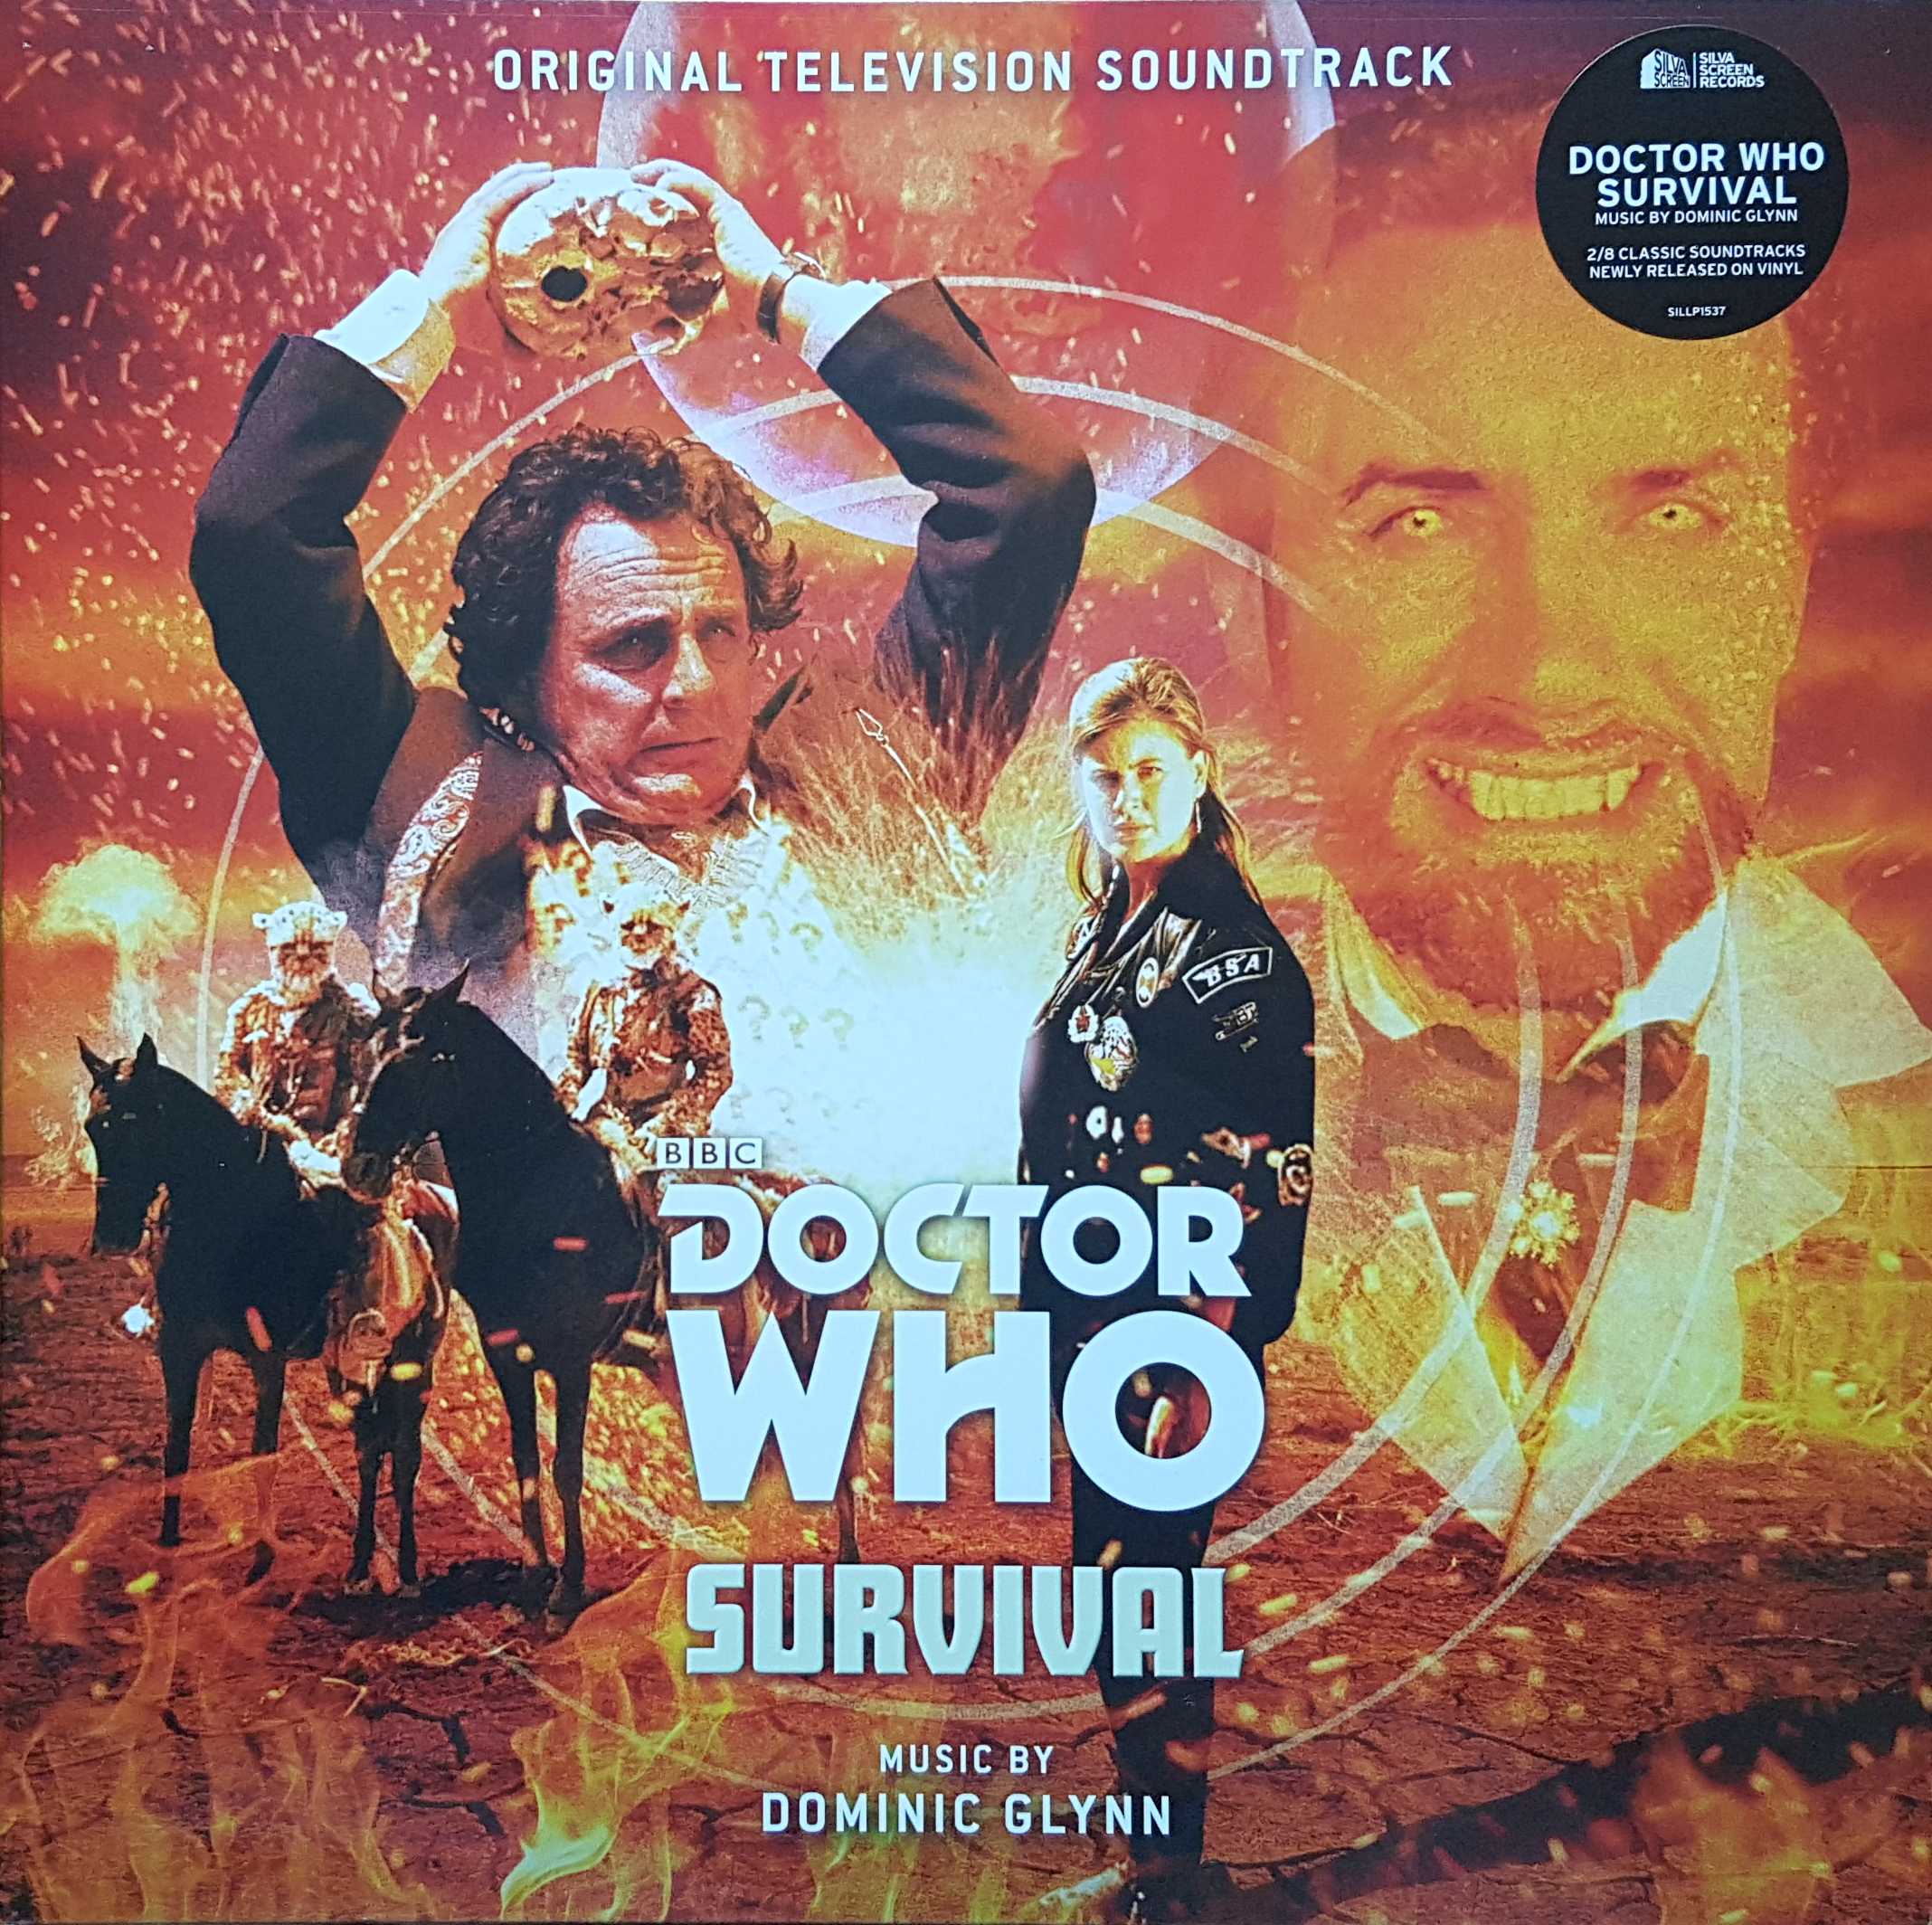 Picture of SILLP 1537 Doctor Who - Survival by artist Dominic Glynn from the BBC records and Tapes library